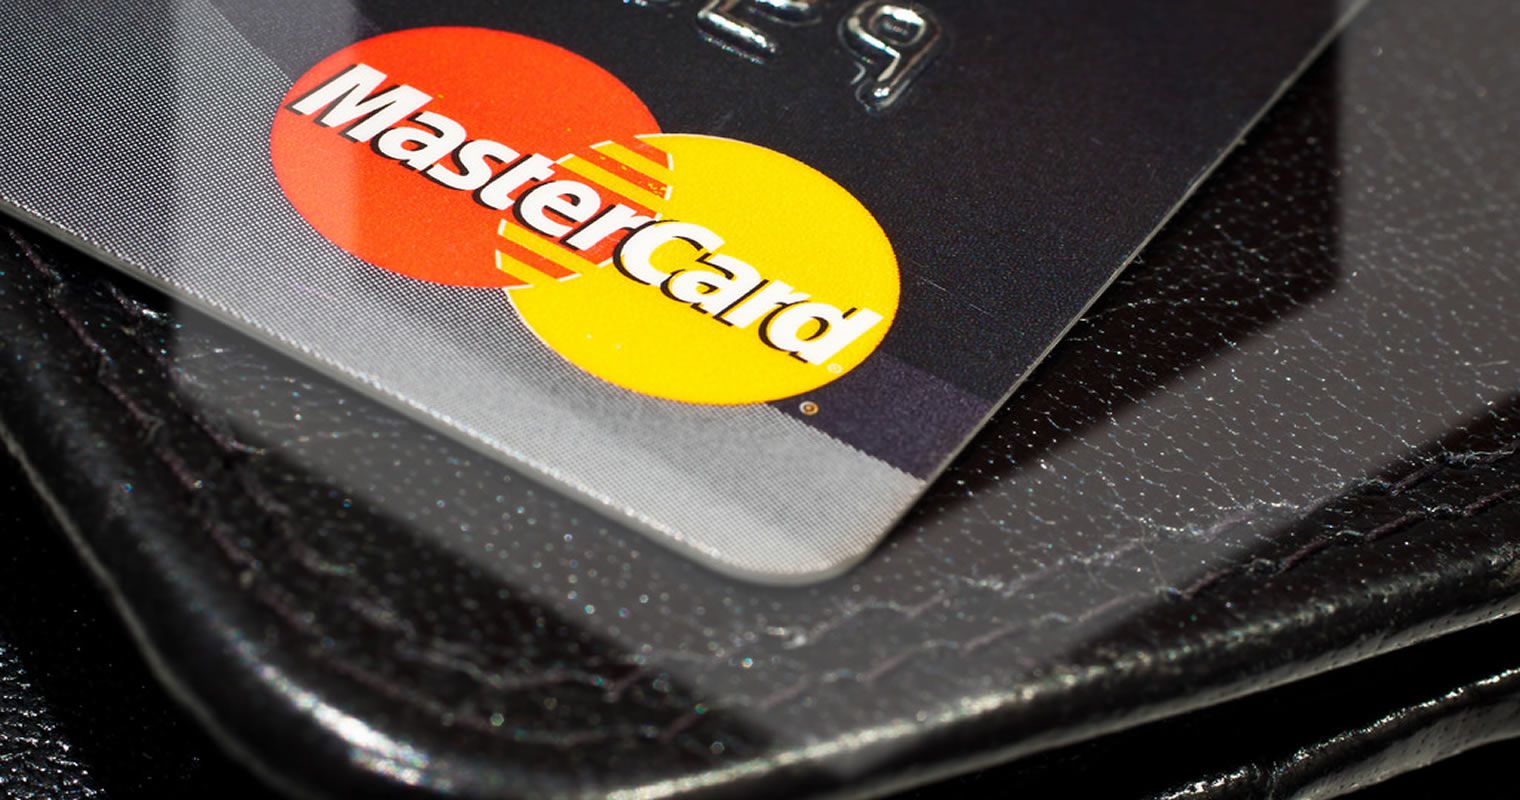 Mastercard Recognises the Influence of Cryptocurrencies